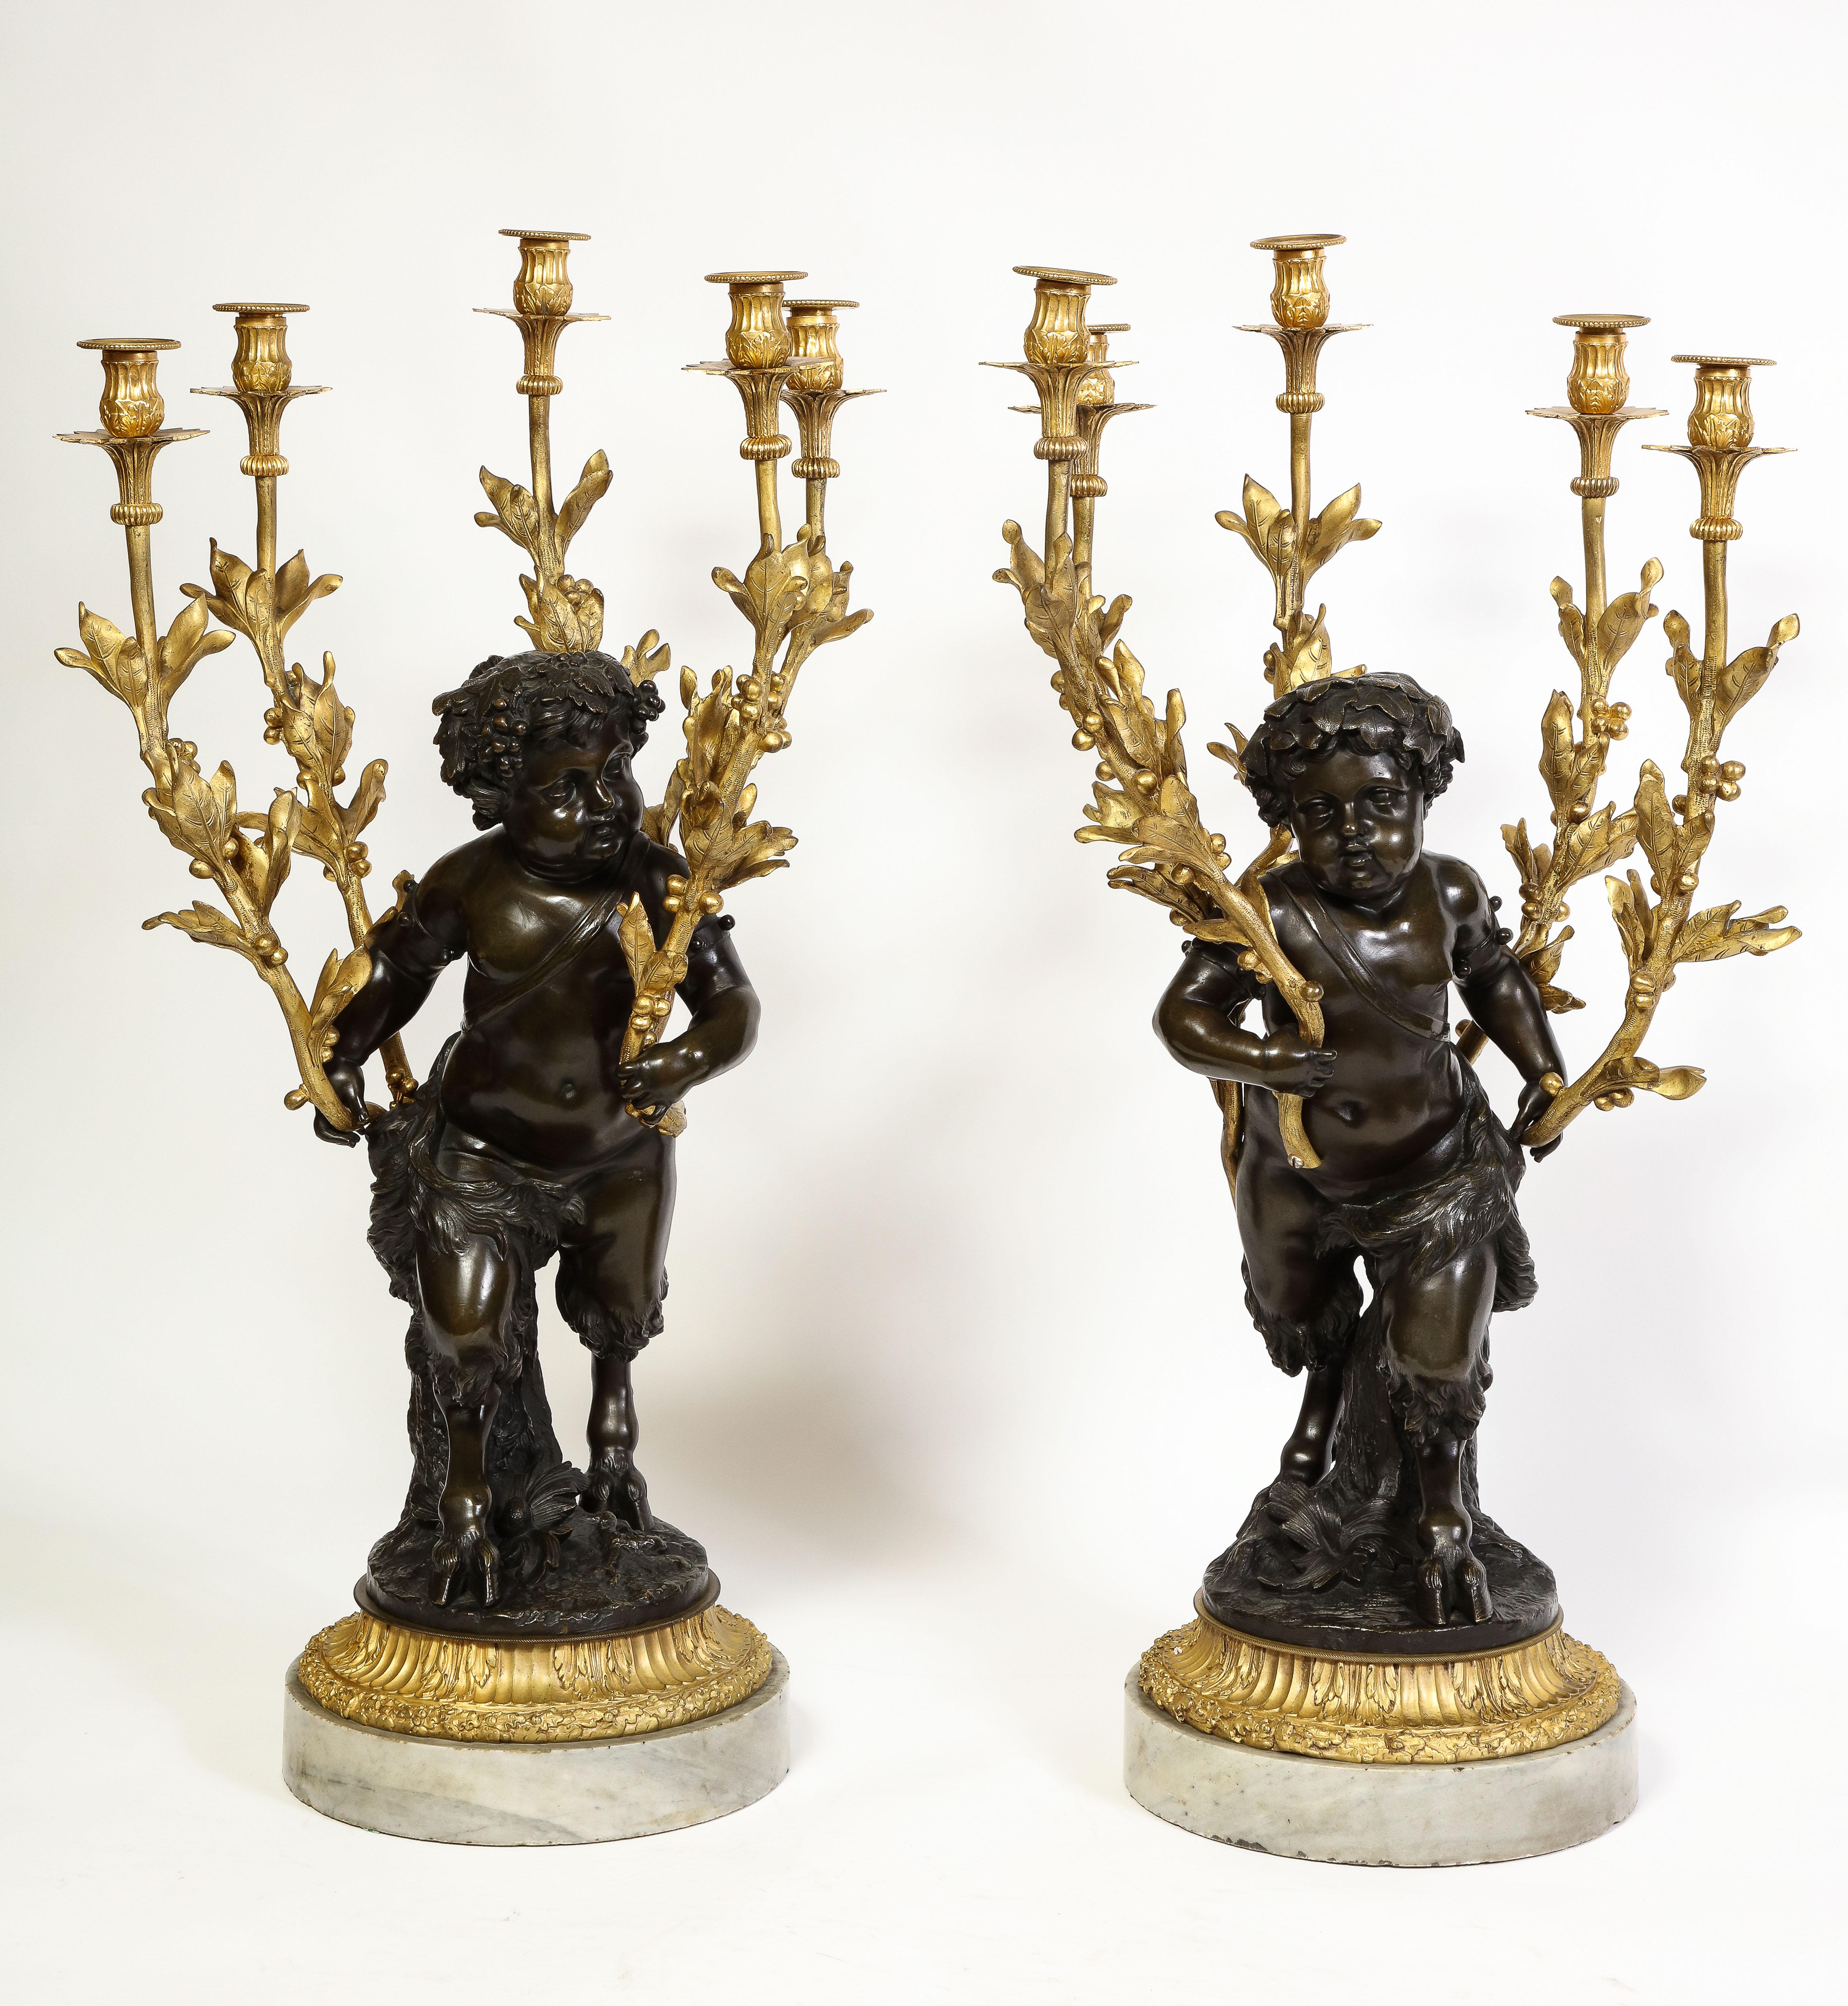 A Large Pair of antique French Louis XV/XVI Patinated & Doré Bronze Putti Form Candelabra on Marble Bases.  This Large Pair of 19th Century French Patinated and Doré Bronze Putti Form Multi-Light Candelabra on Marble Bases are masterpieces of